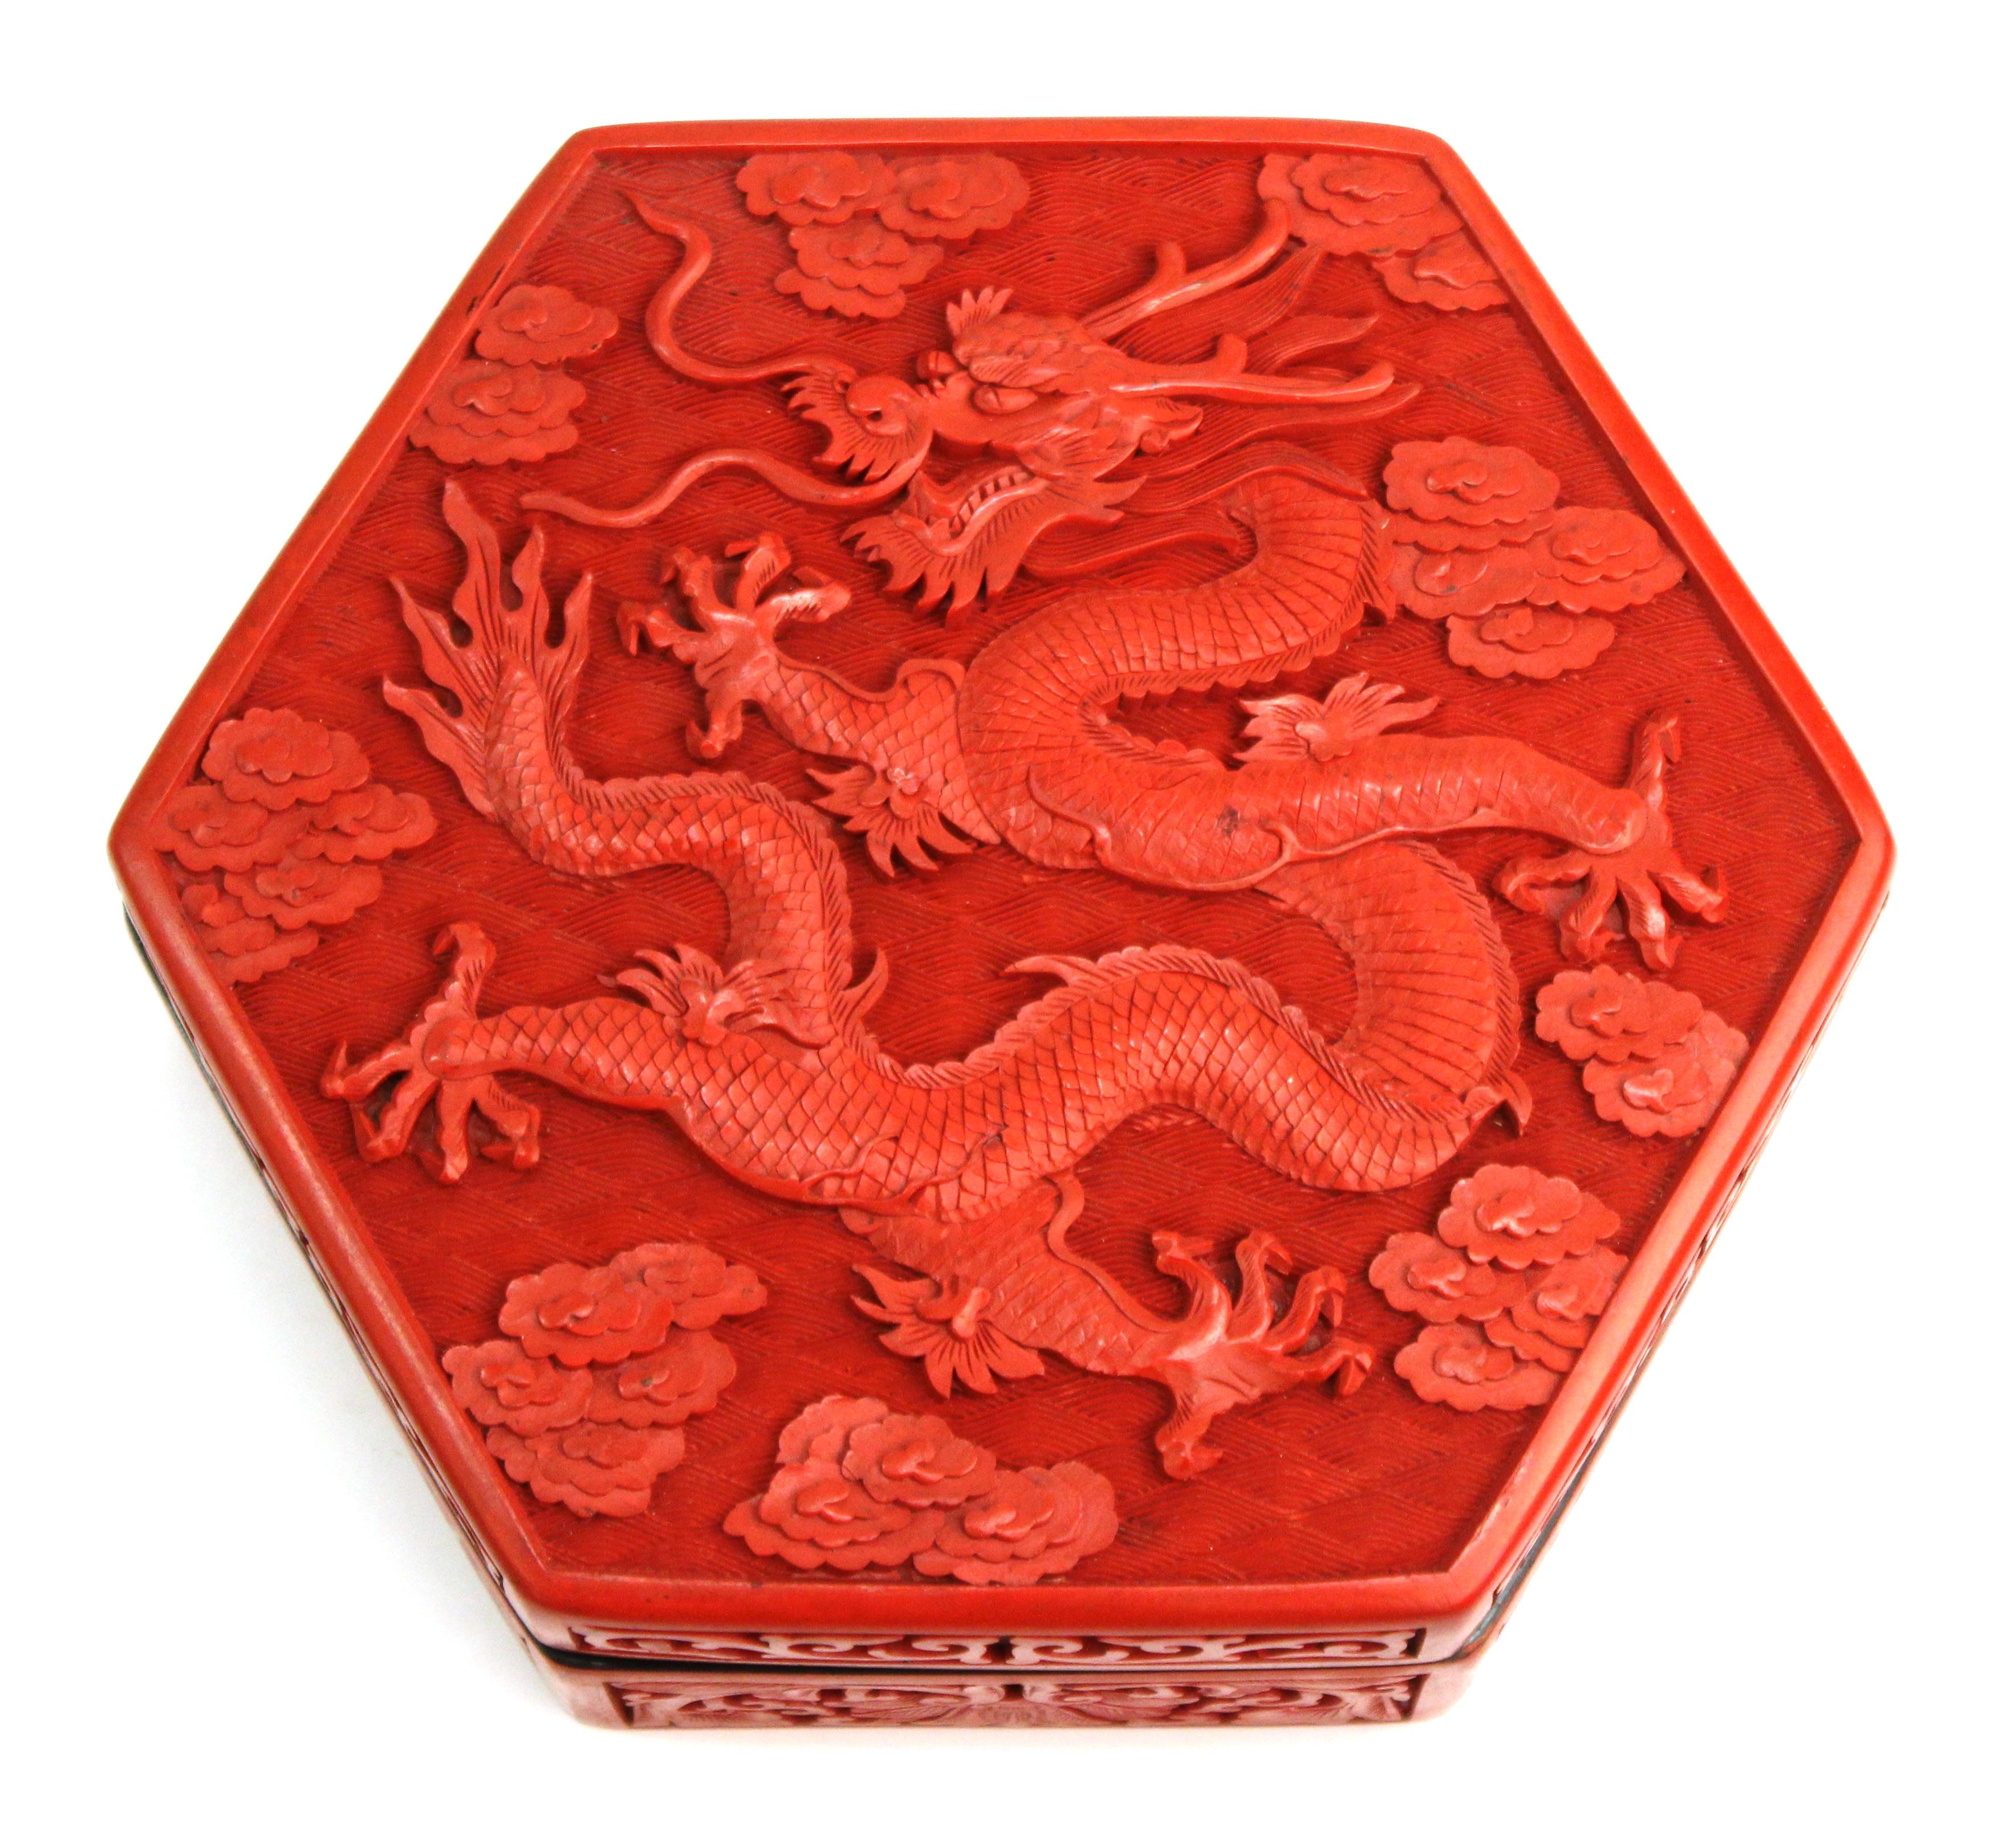 Chinese hexagonal red lacquer cinnabar box with elaborate carved dragon motif on the lid. The piece dates from the 1930s and is in great vintage condition with age-appropriate wear.